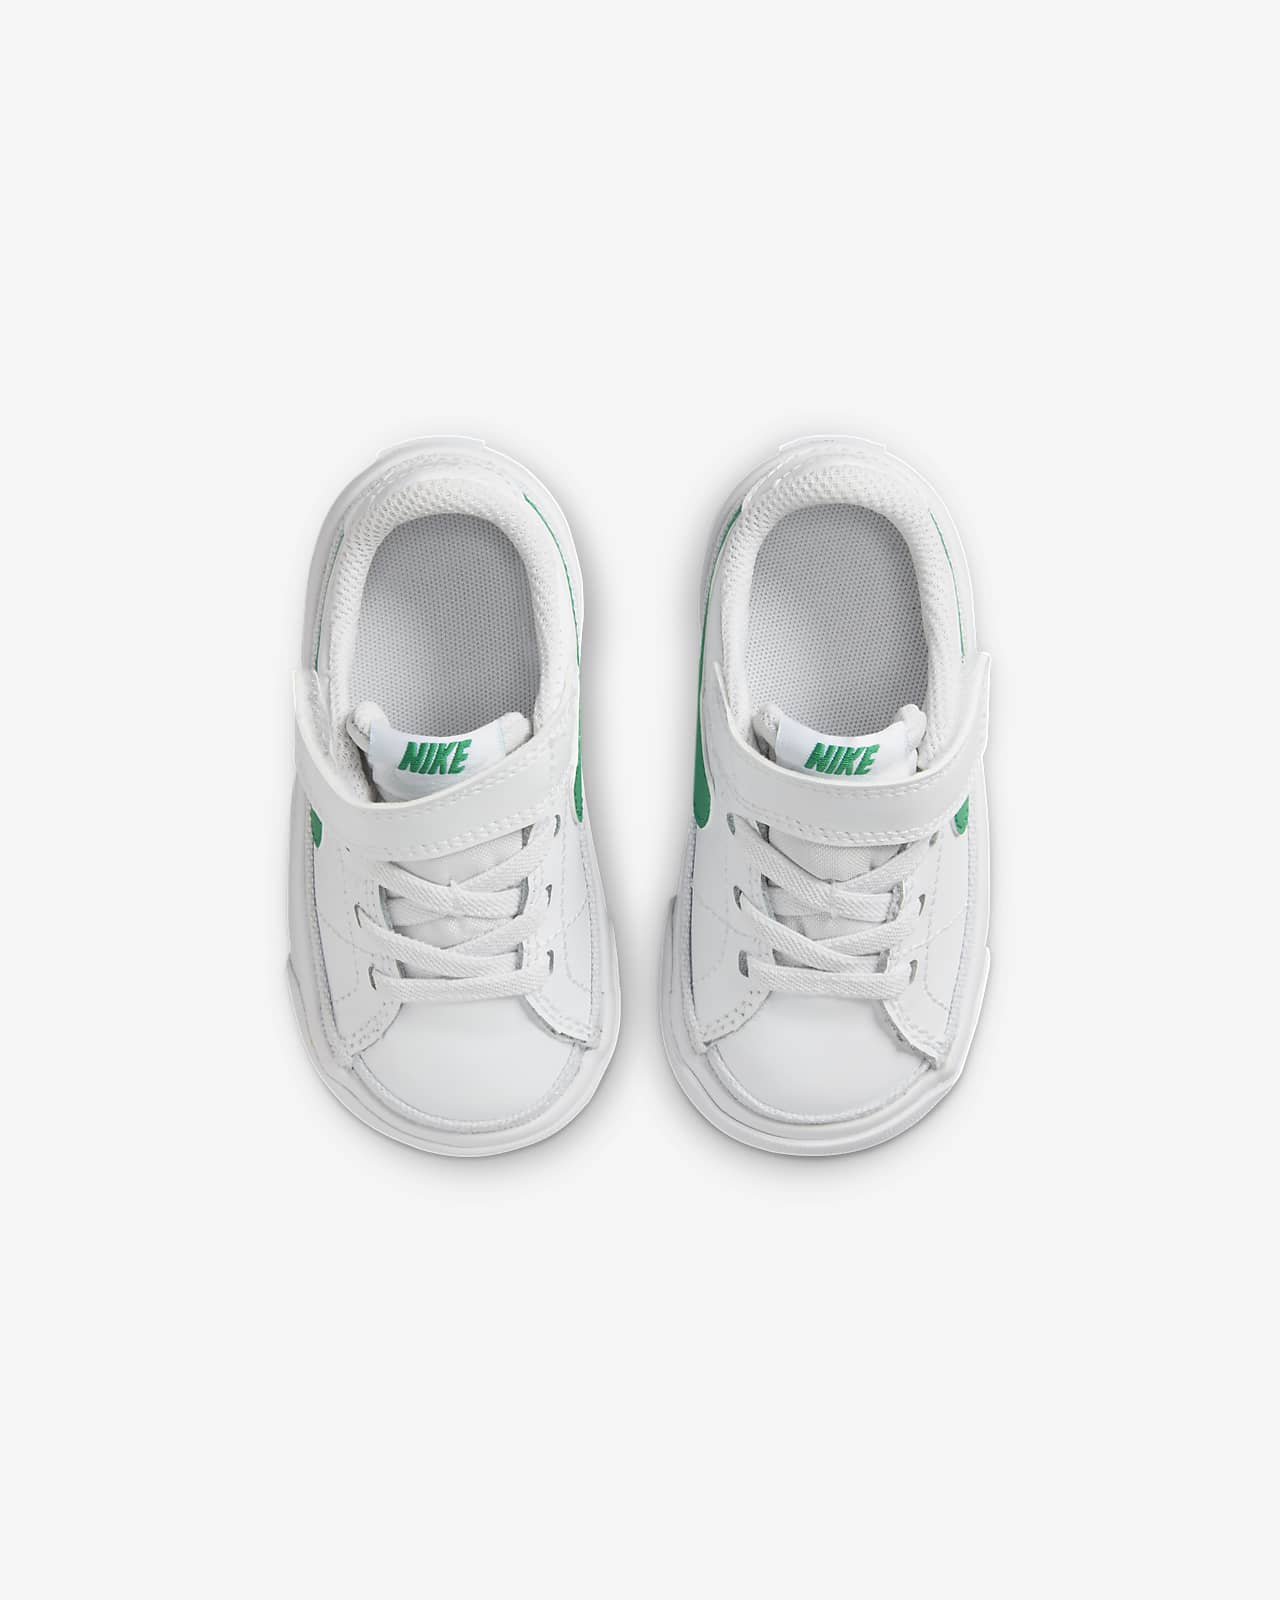 Nike Court Legacy Baby/Toddler Shoes.